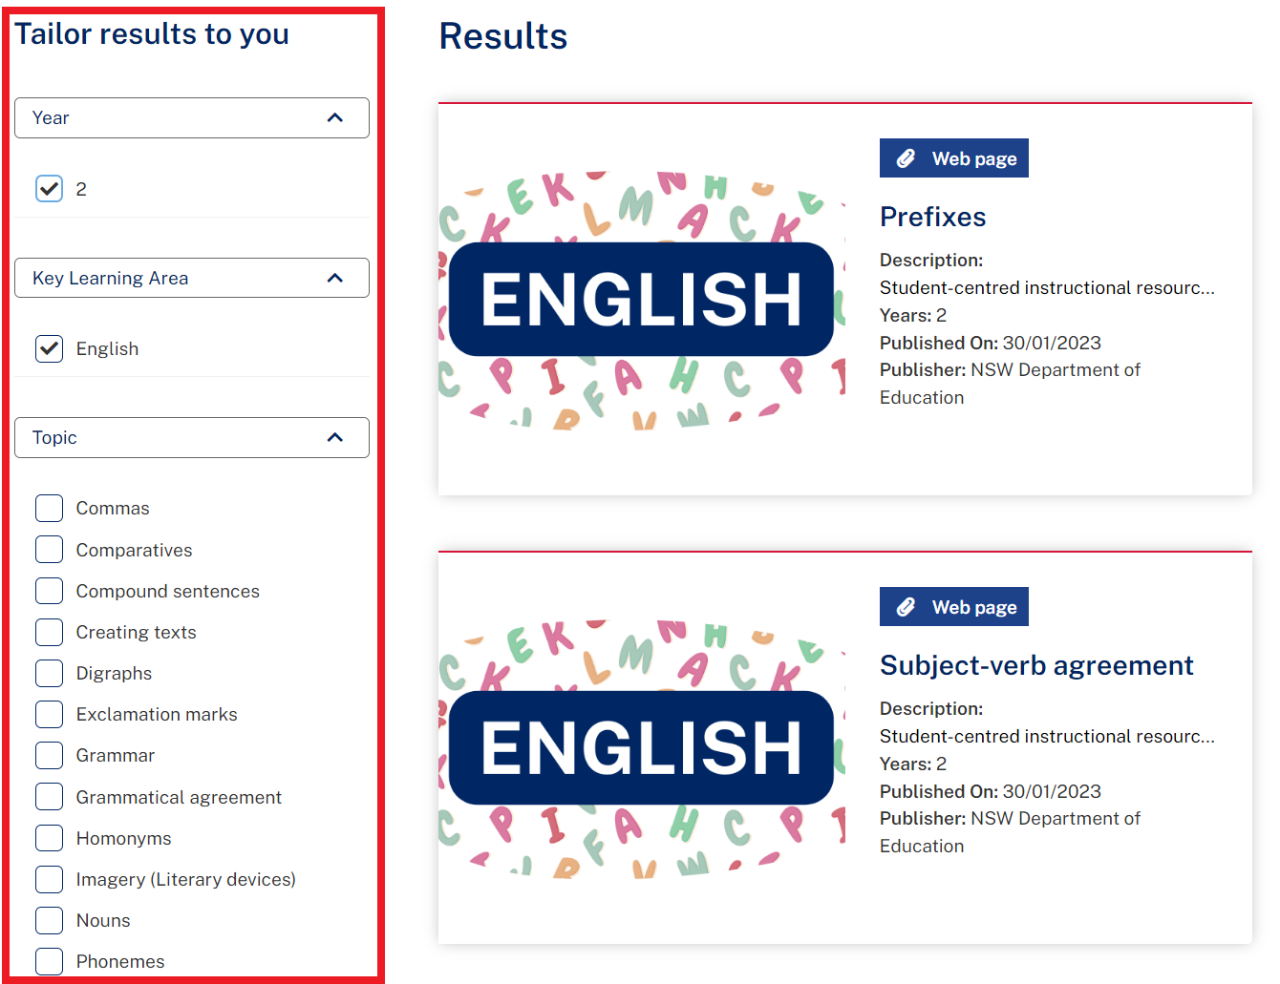 An example of English filters for Year 2 applied